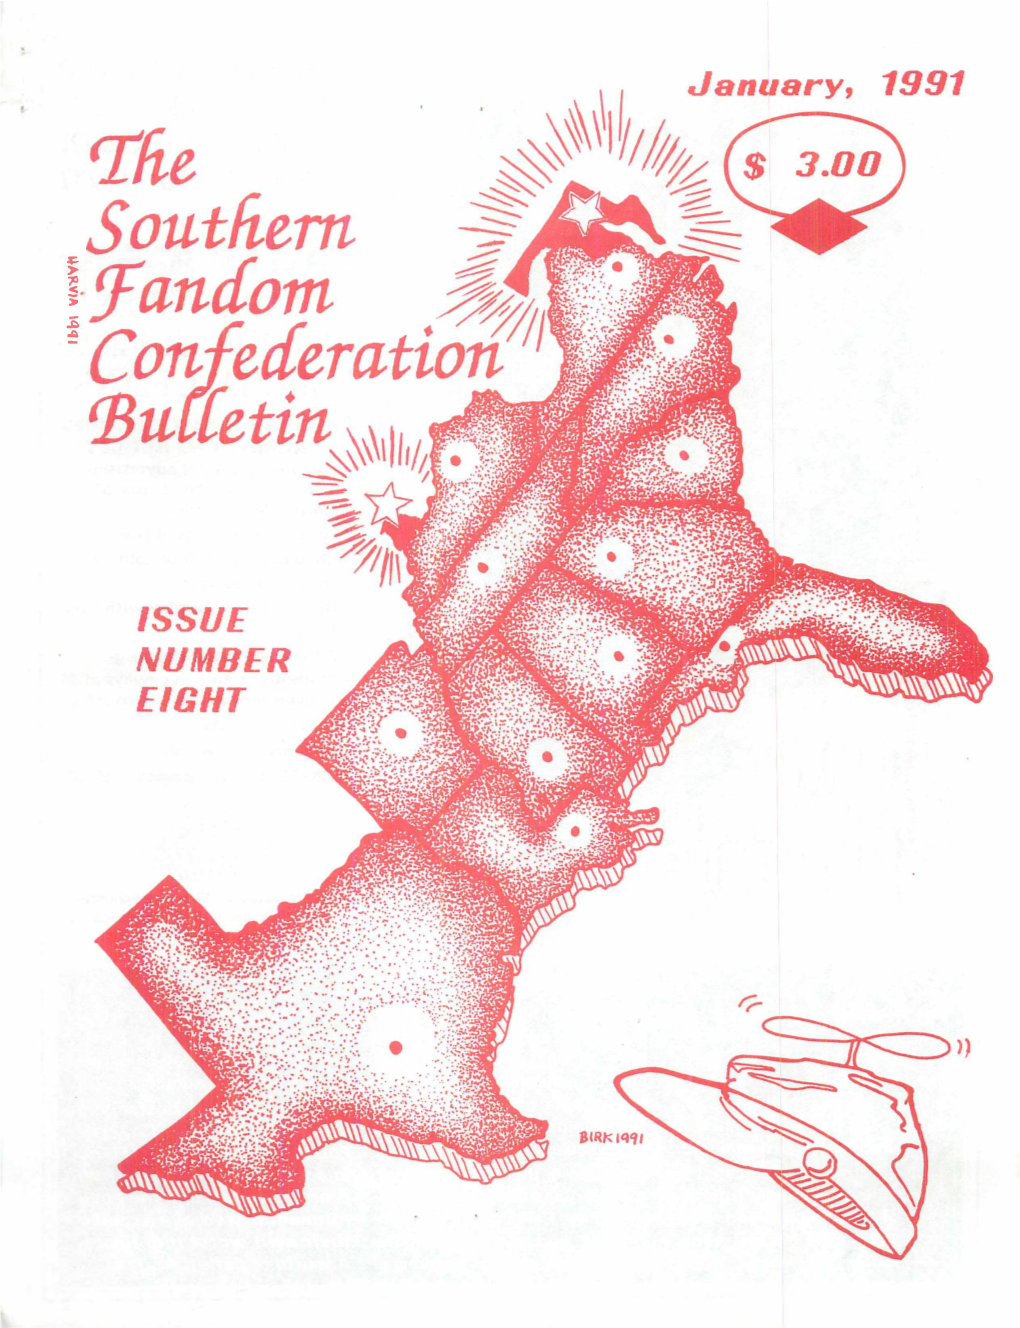 Southern Fandom Confederation ♦ ♦ ♦ ♦ ♦ ♦ Support Electrical Eggs -- Nineteen Ninety-One"